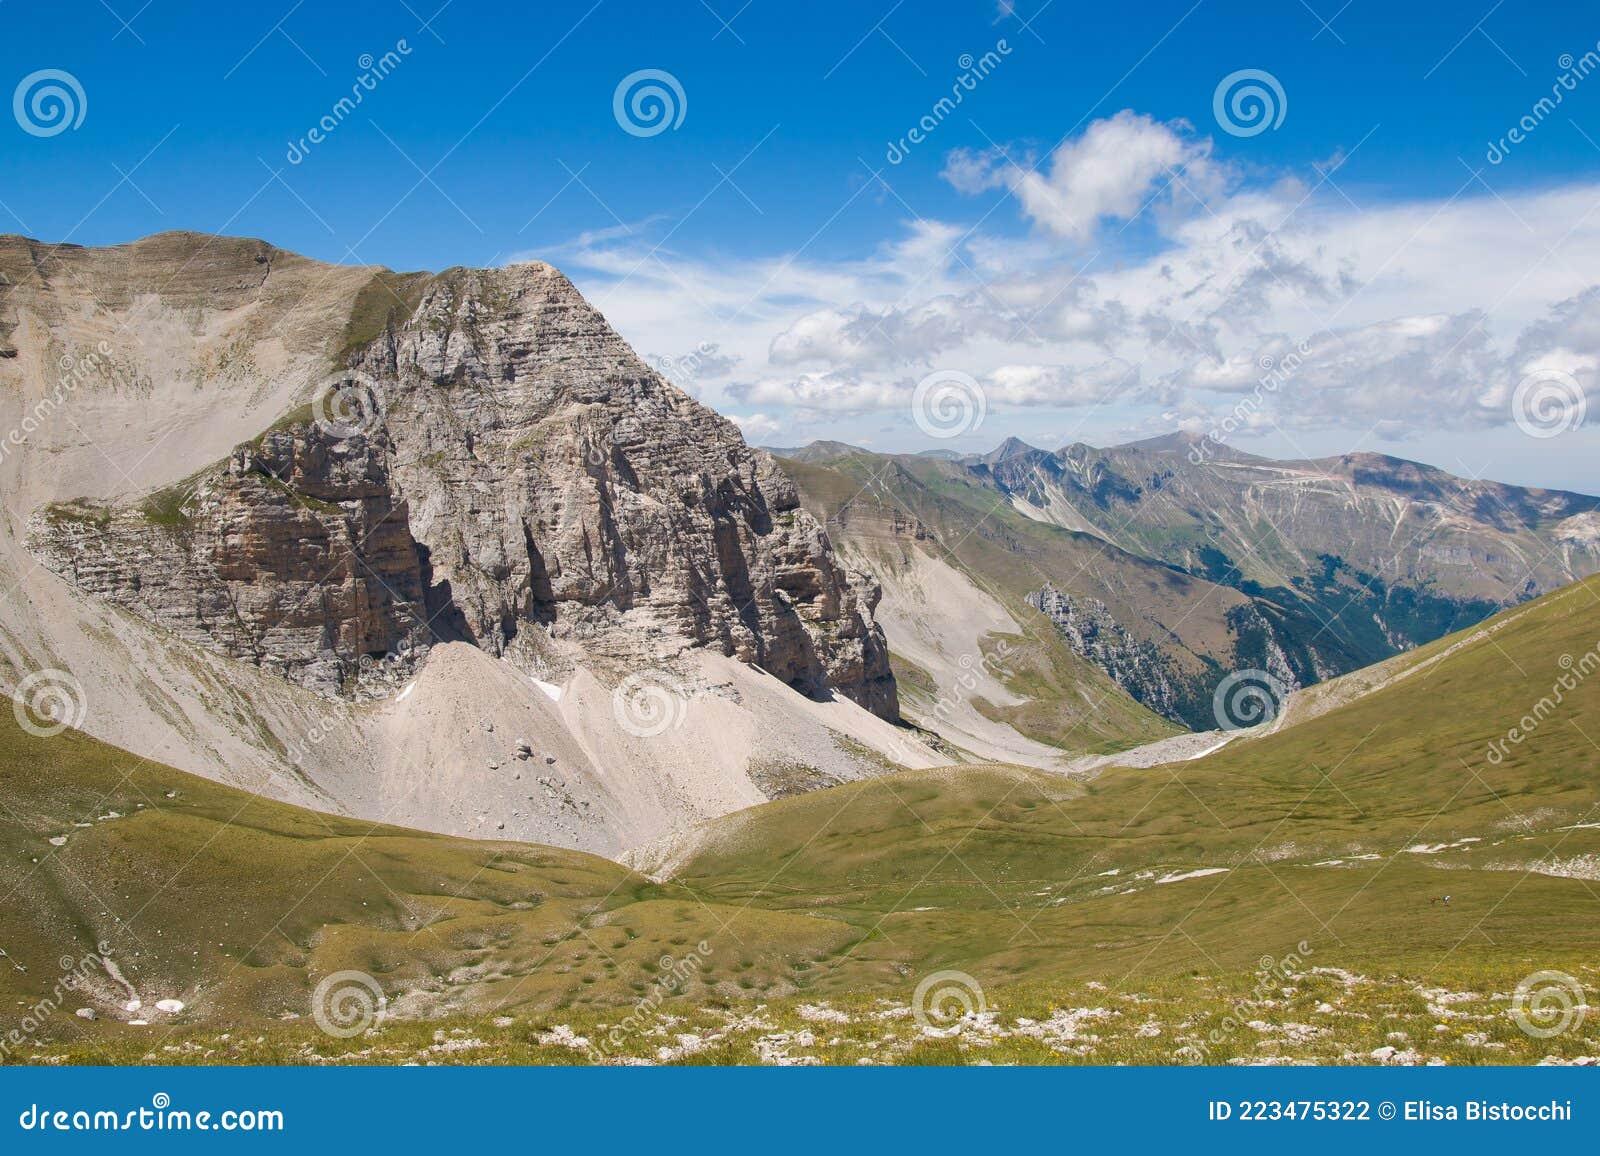 beautiful landscape summit of mount vettore, one of the highest peaks of the apennines with its 2,476 meters